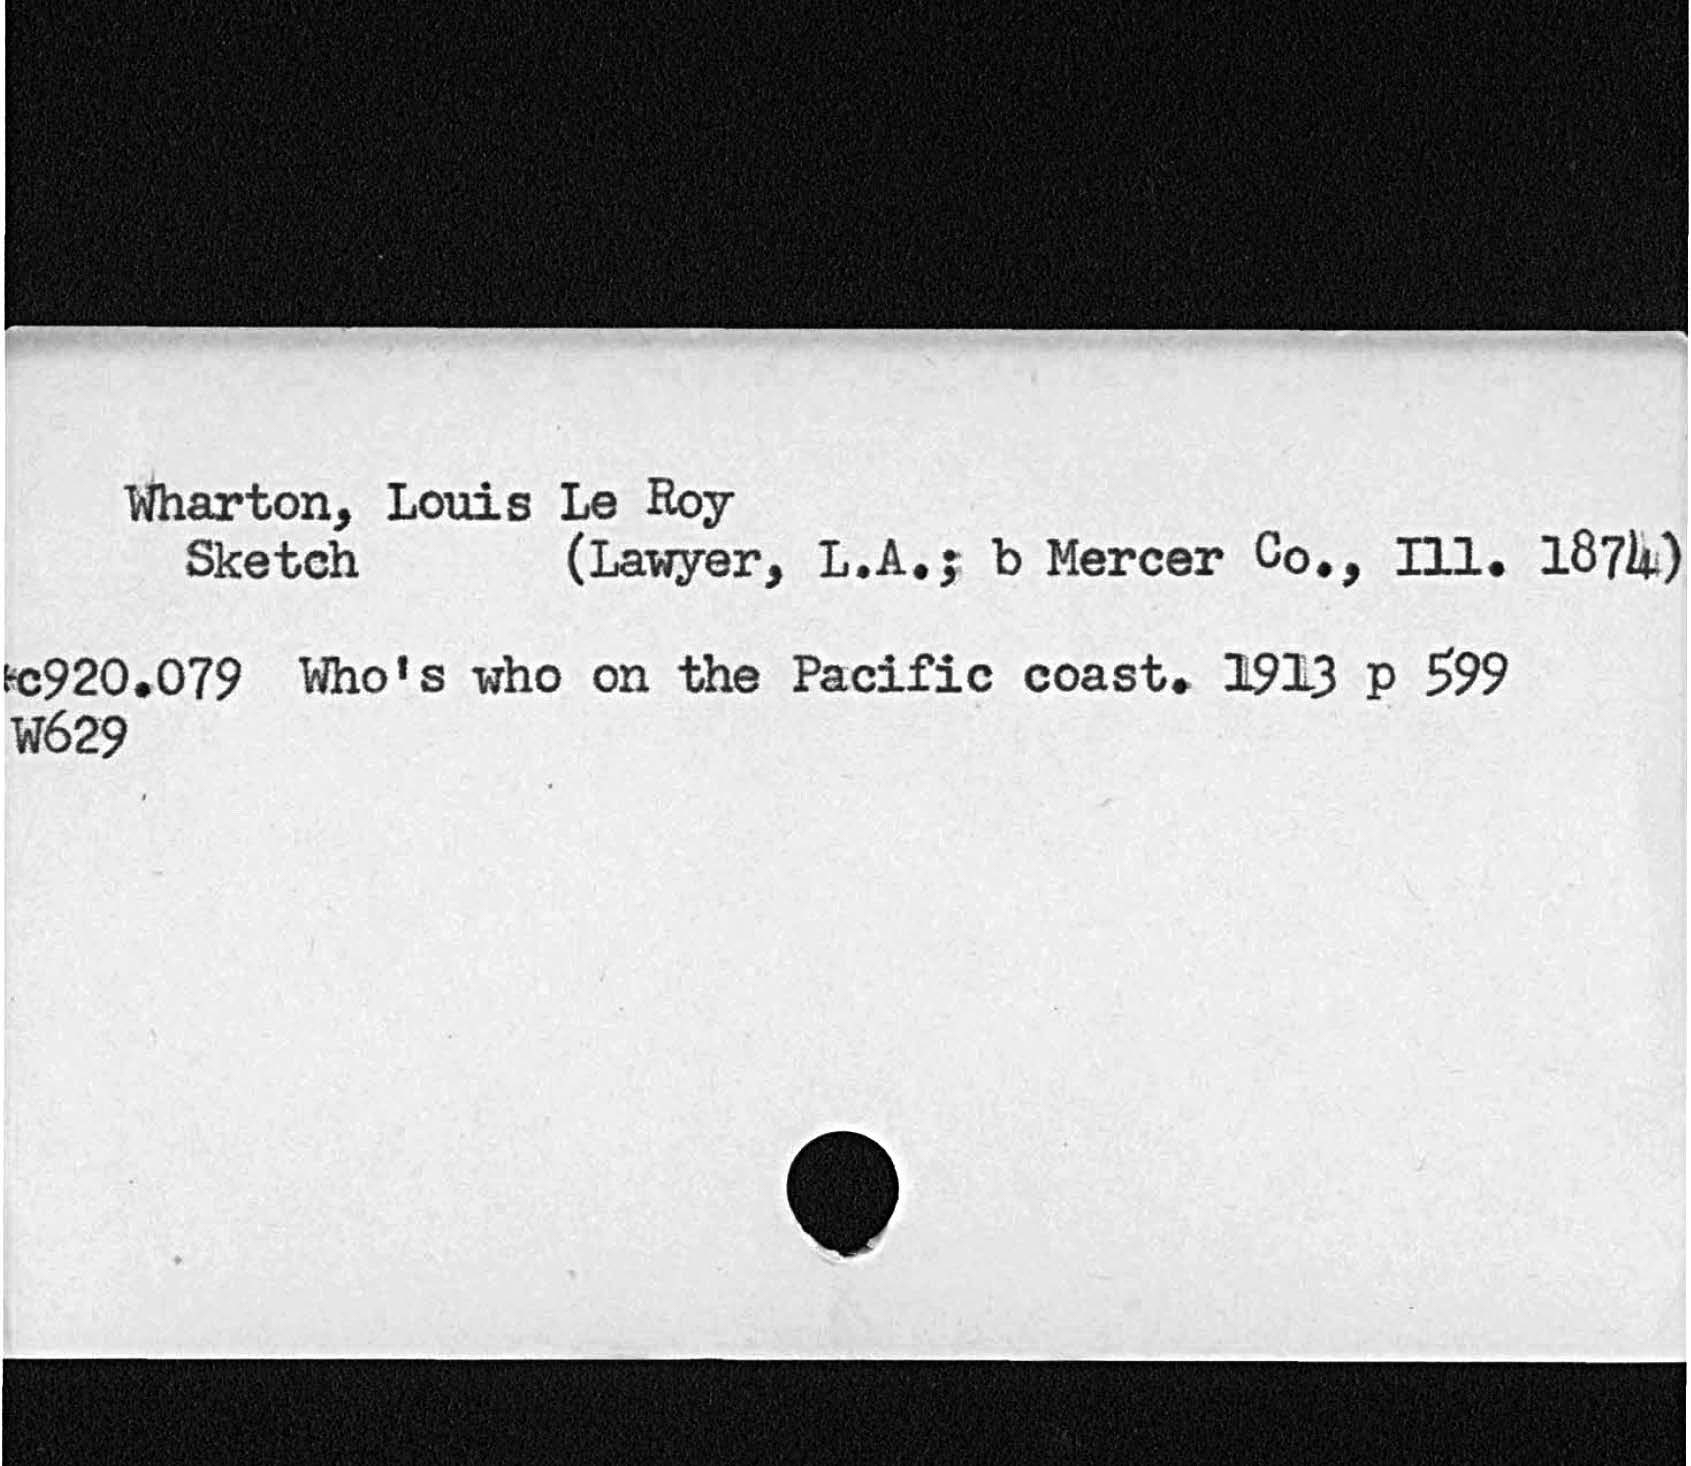 Wharton, Louis Le Roy,sketch Lawyer, L. A. b Mercer Co. Ill. 187Who’s who on the Pacific coast. ]913 p 599920. 079 W62- 9